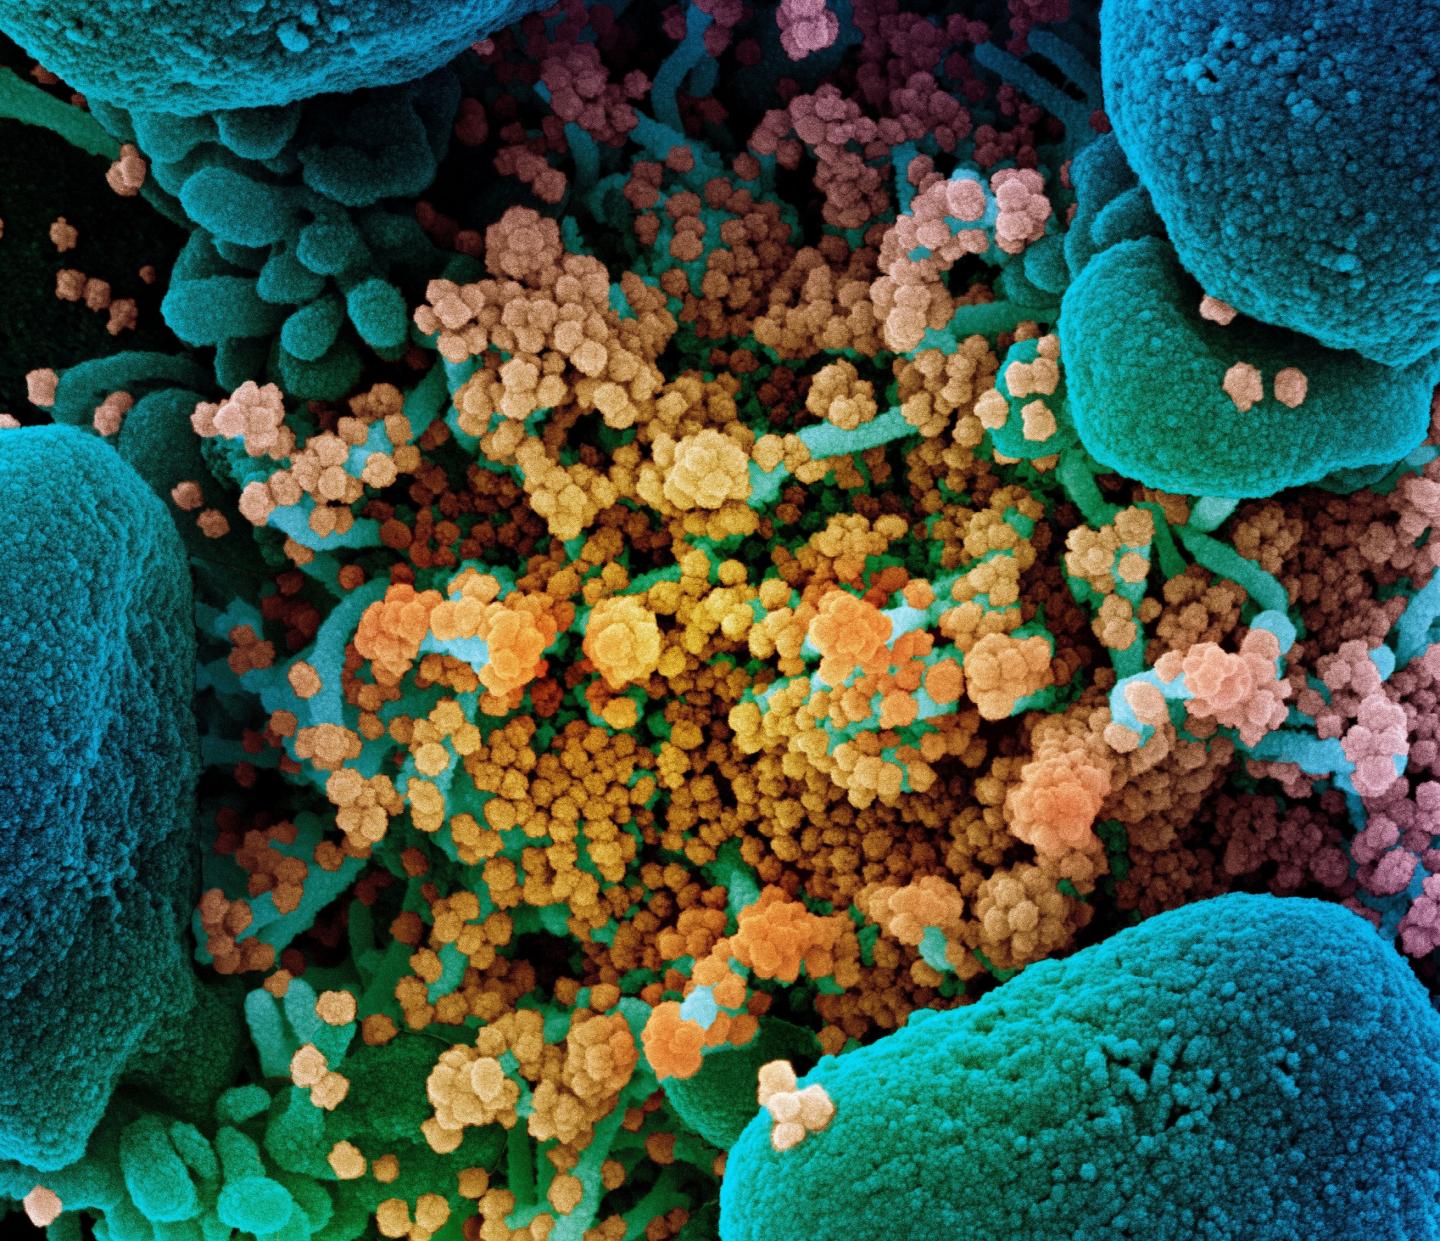 Scanning electron micrograph of a cell infected with SARS-CoV-2